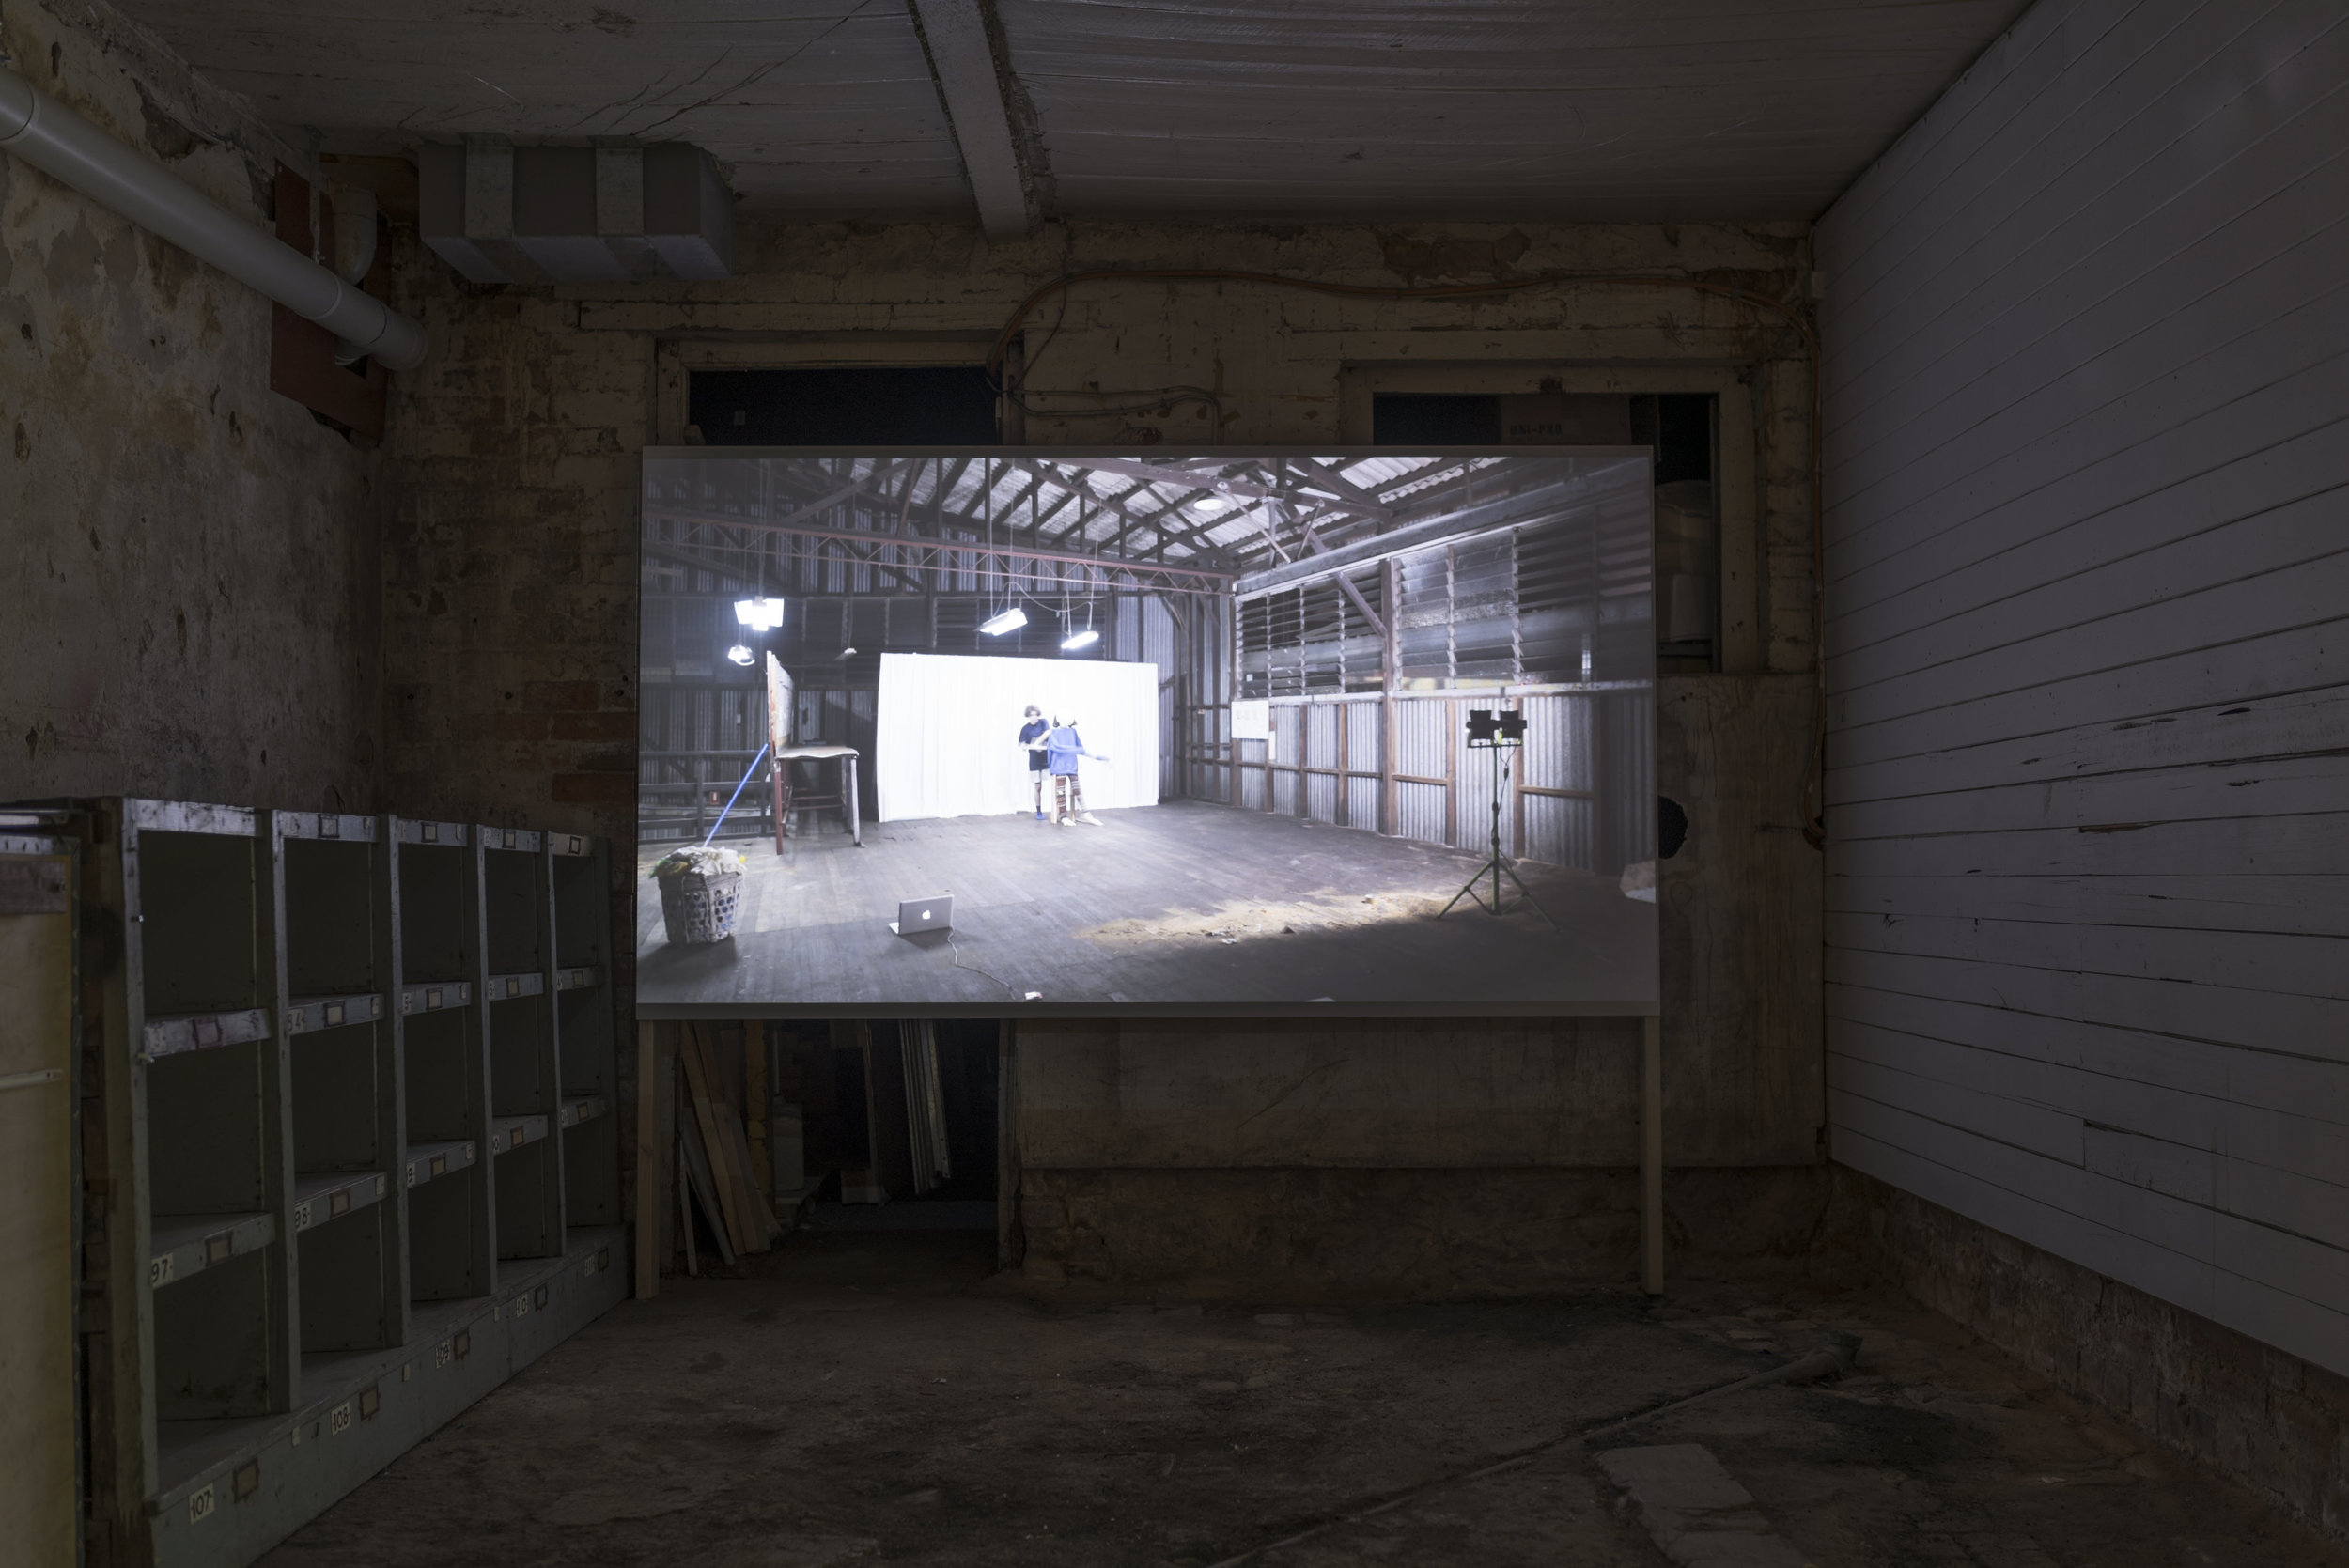   Slow Movement Sequence,&nbsp; video installation at Visual Bulk.  Photograph by Lucy Parakhina. 